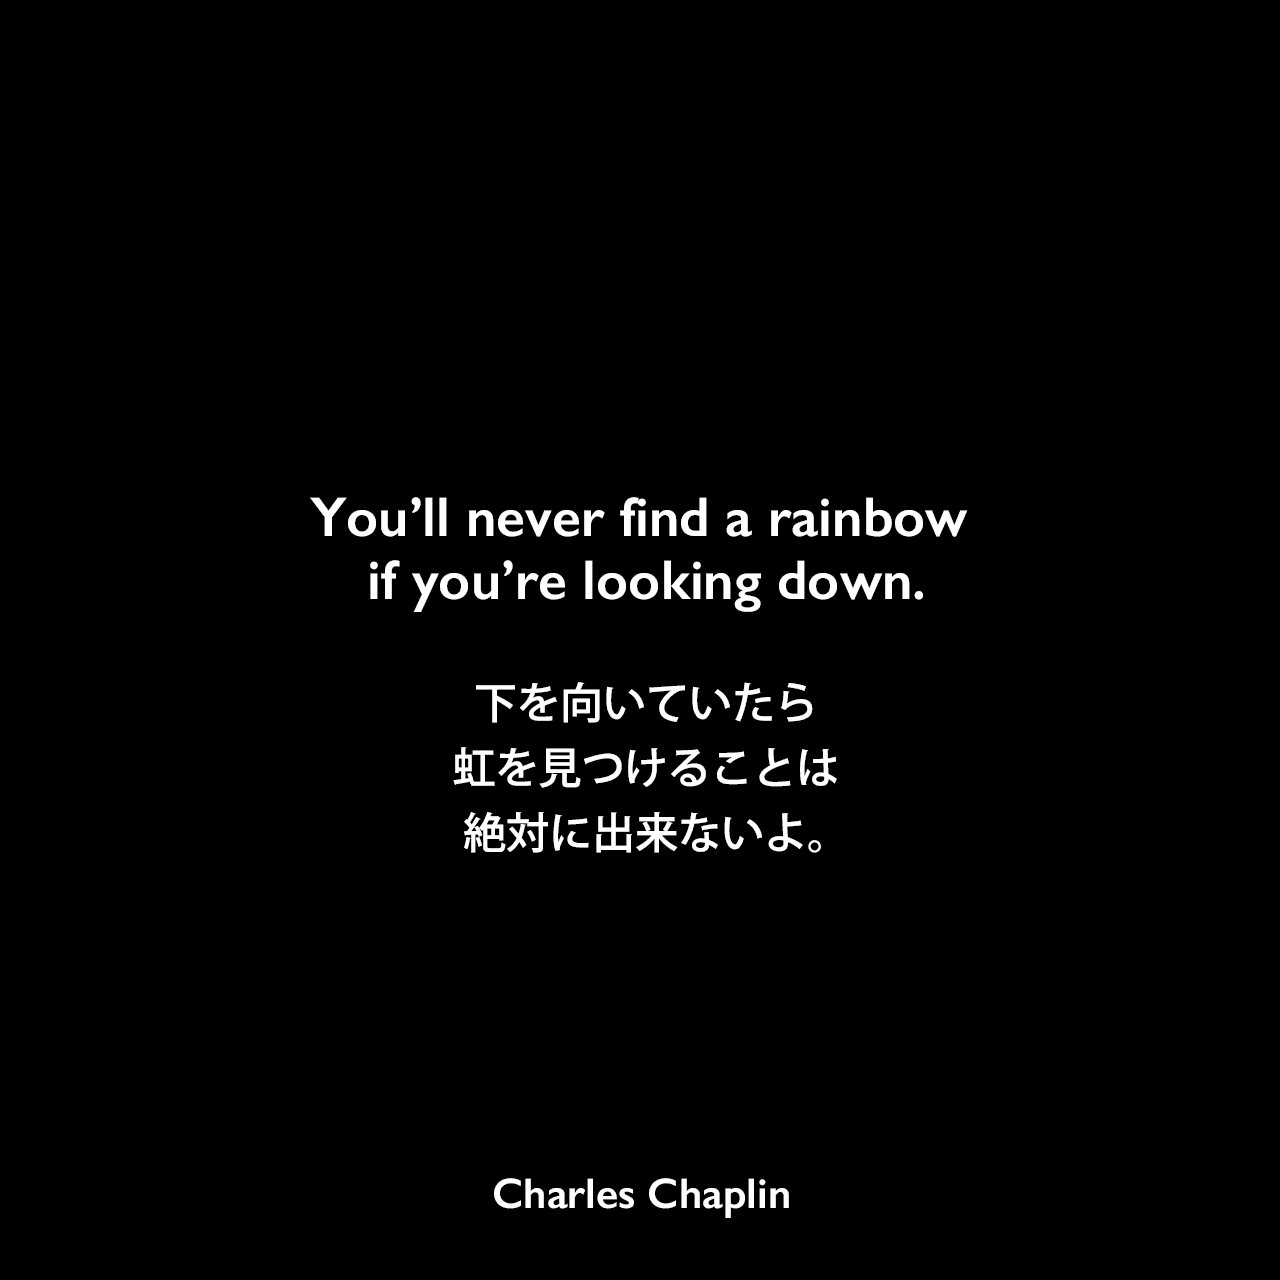 You’ll never find a rainbow if you’re looking down.下を向いていたら、虹を見つけることは絶対に出来ないよ。